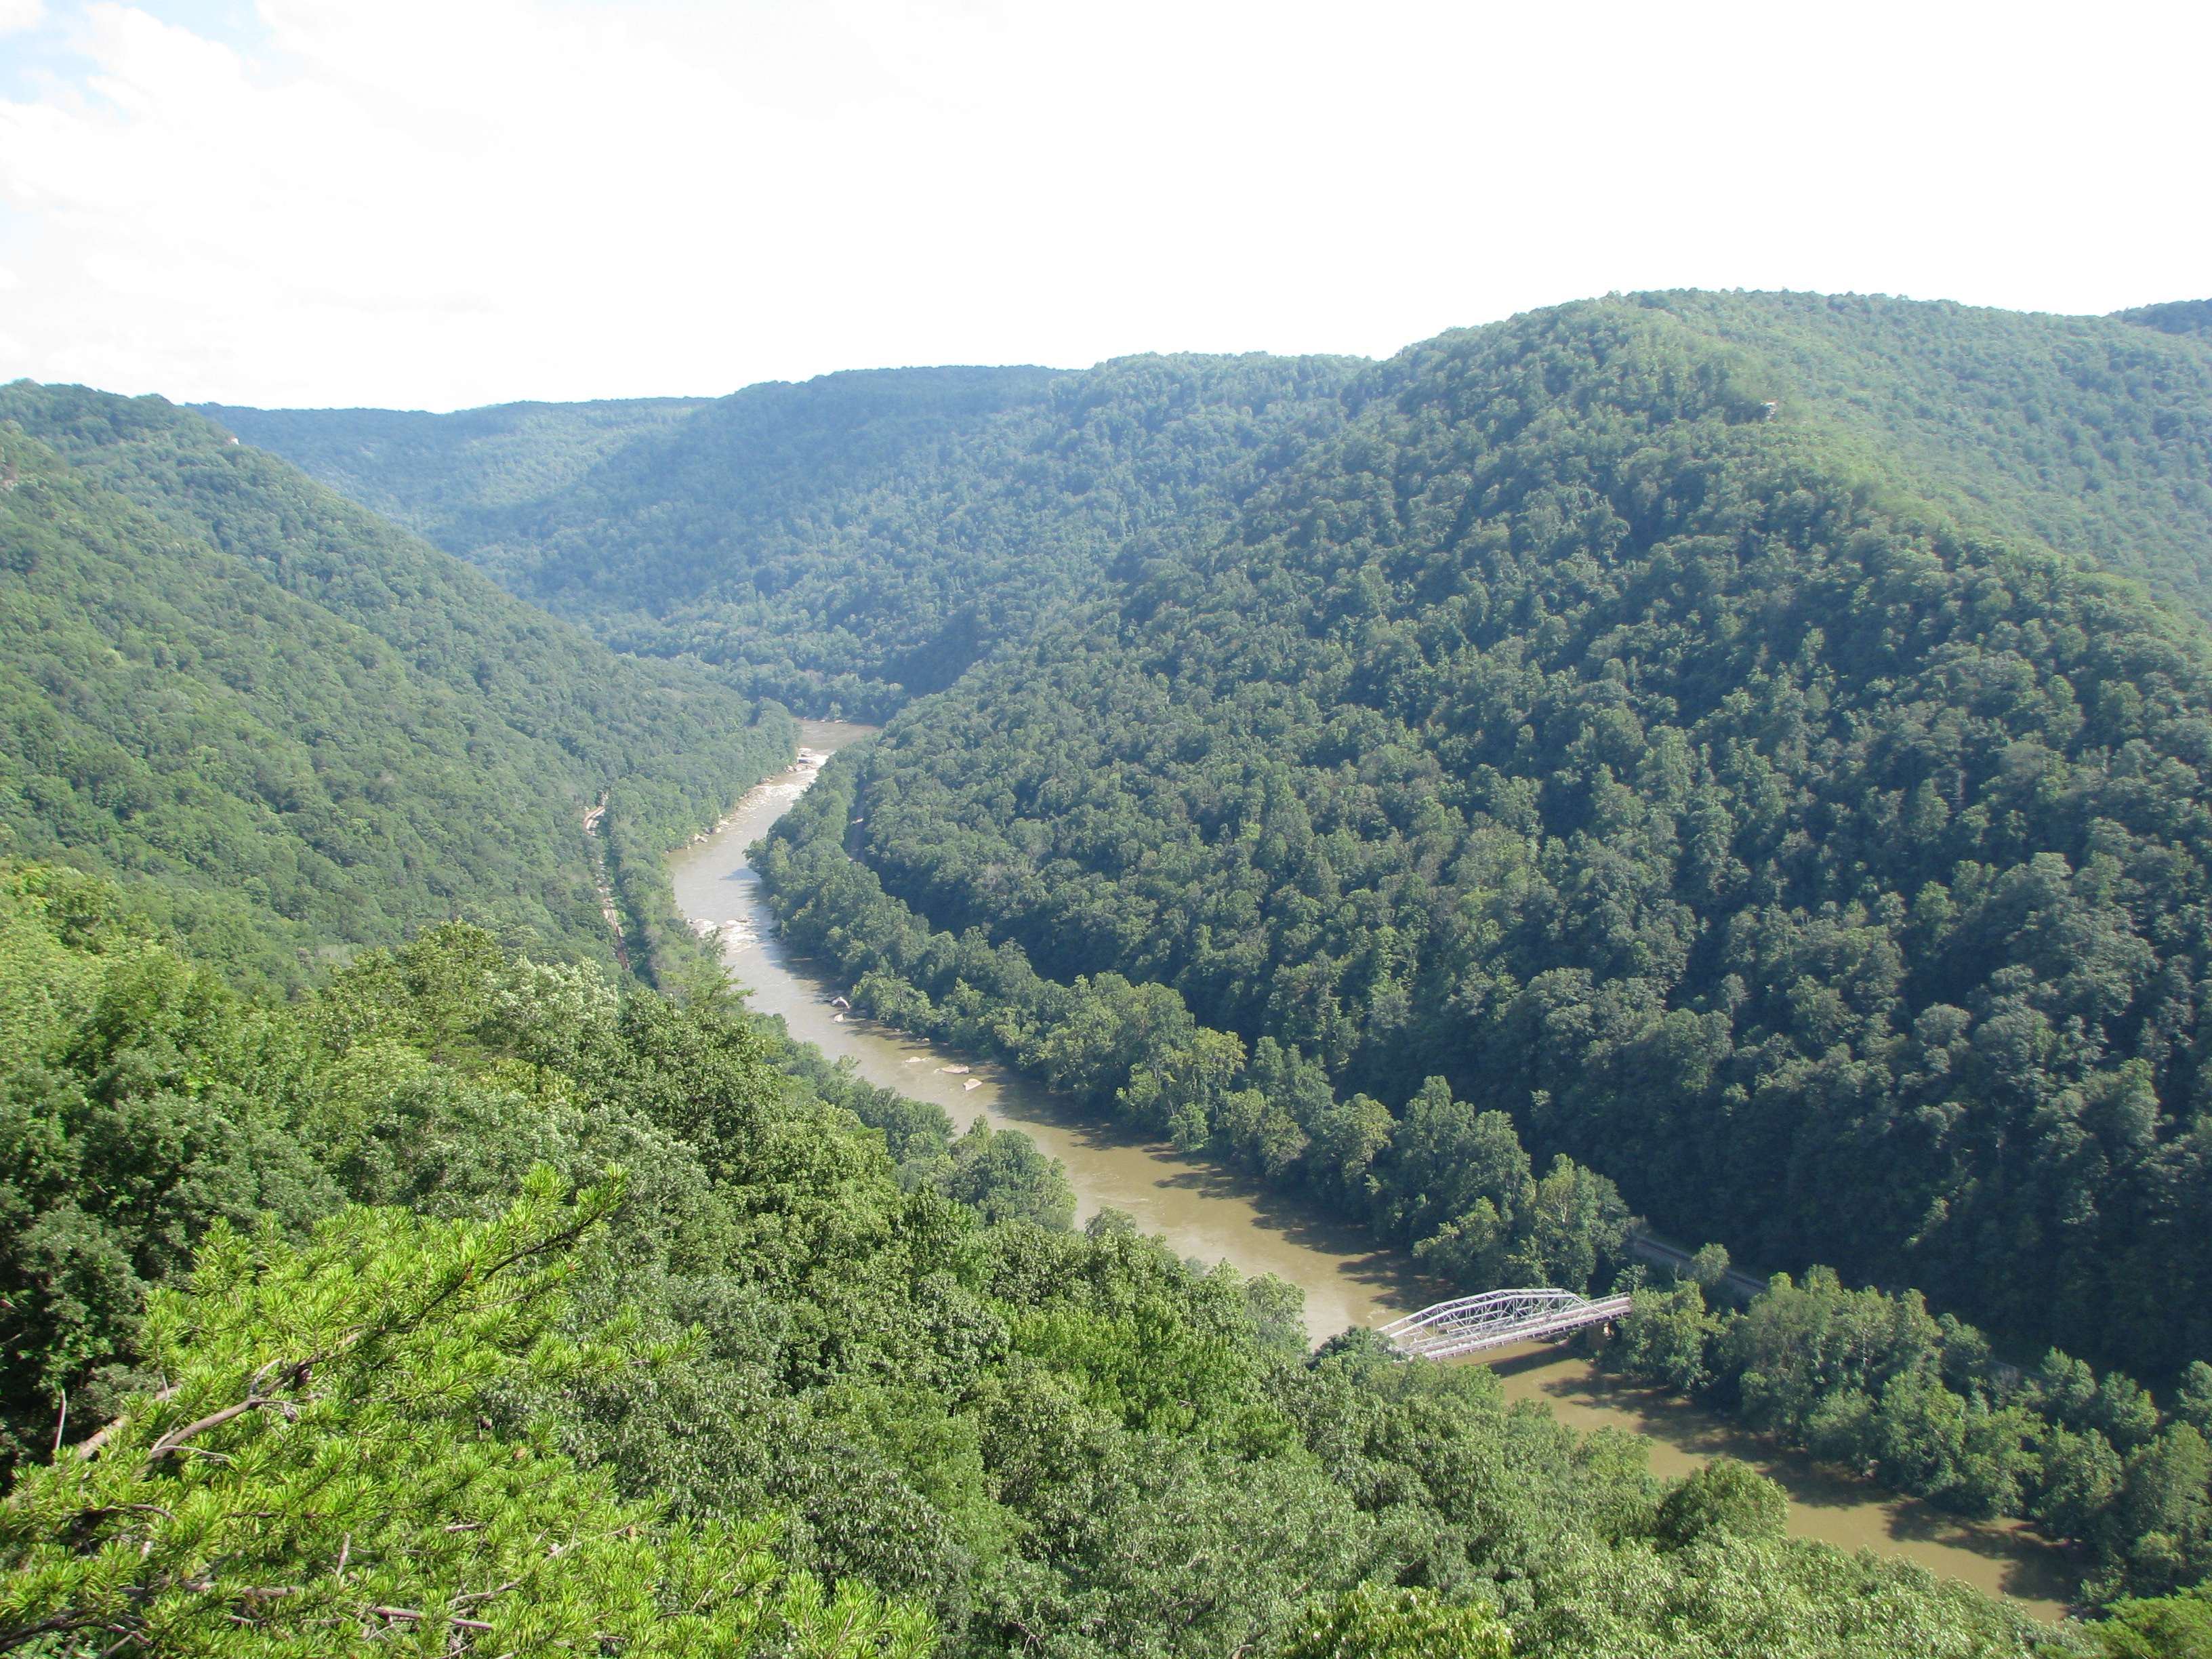 New River Gorge from the National Park Service overlook